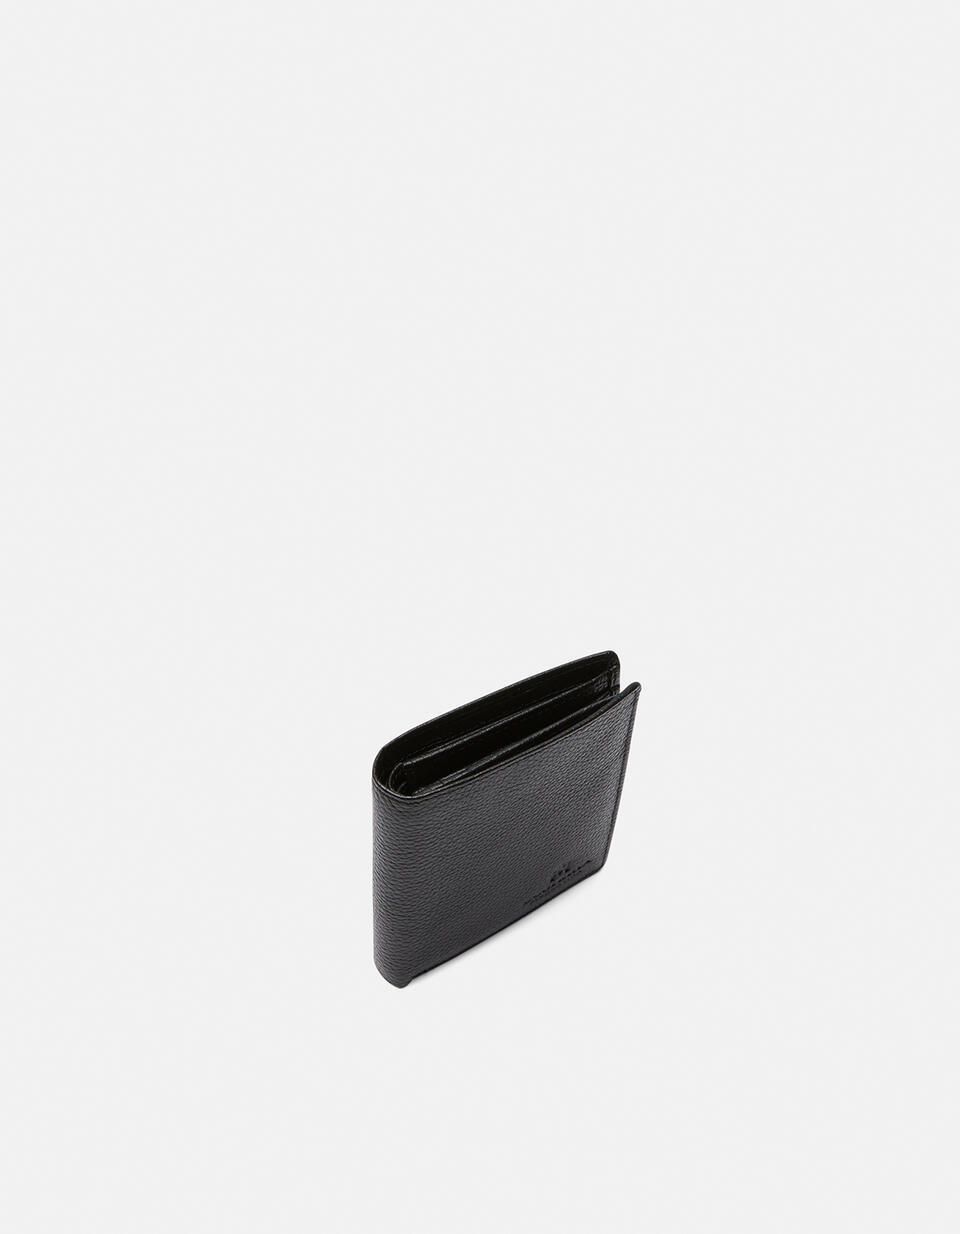 Anti-Rfid vertical wallet with coin purse in printed calf grained - Women's Wallets - Men's Wallets | Wallets NERO - Women's Wallets - Men's Wallets | WalletsCuoieria Fiorentina